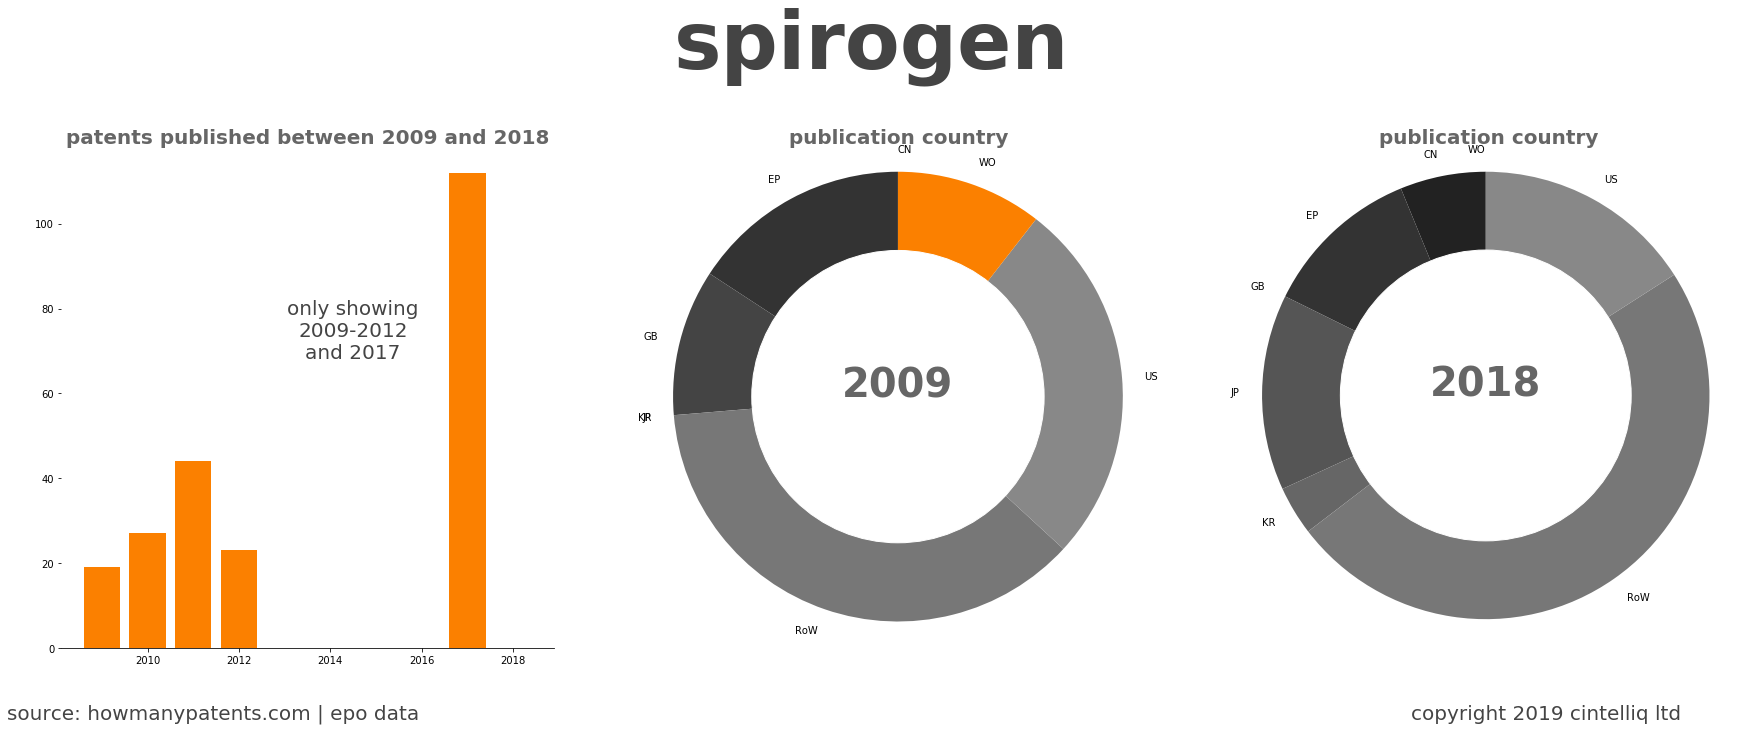 summary of patents for Spirogen